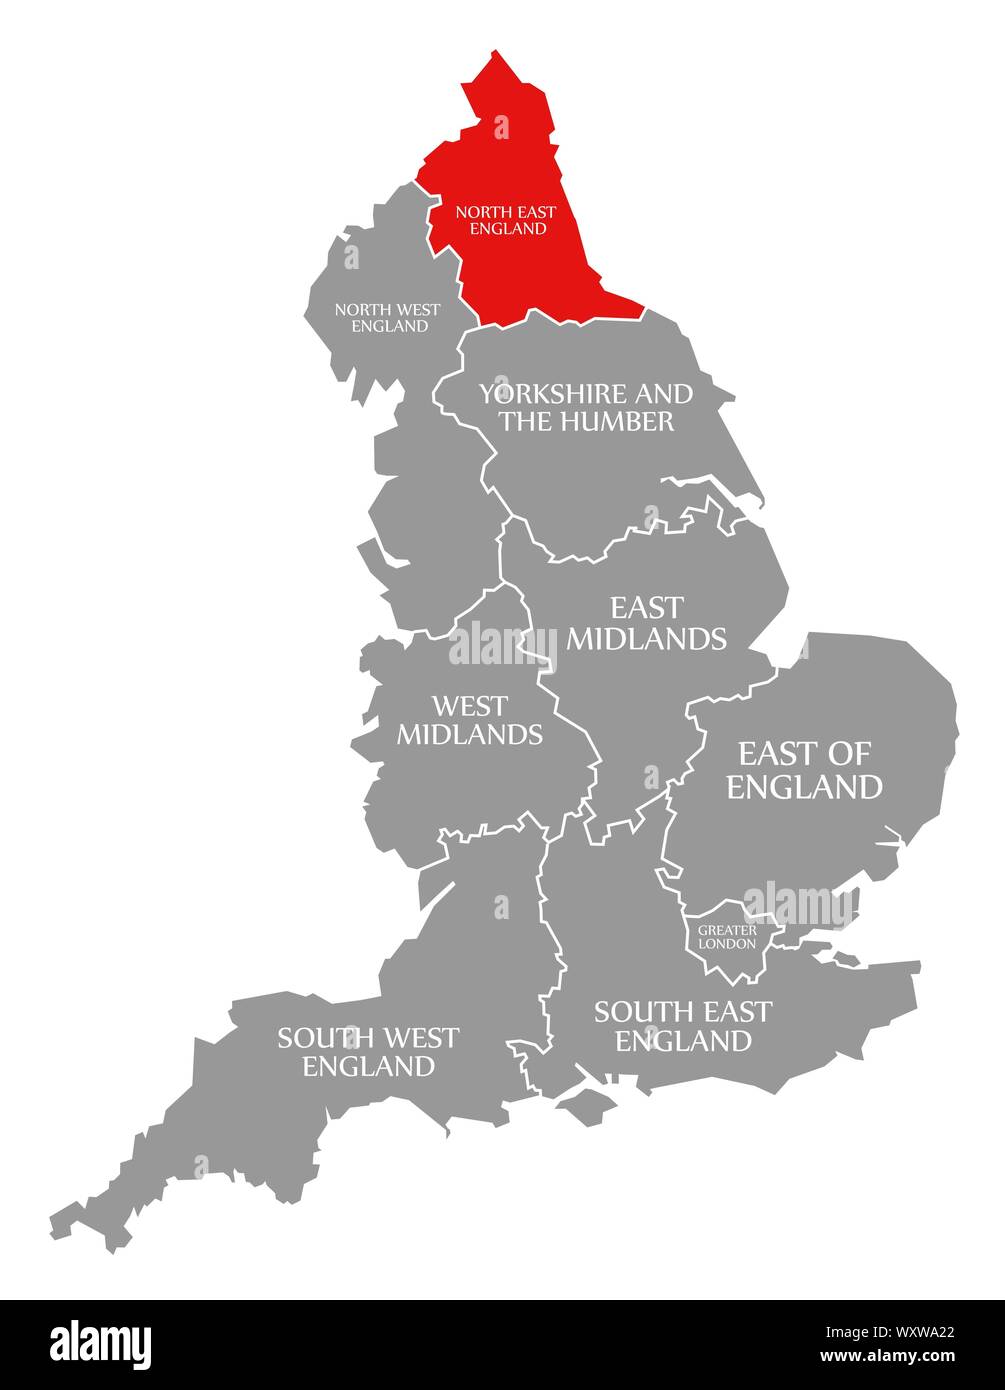 North East England red highlighted in map of England UK Stock Photo